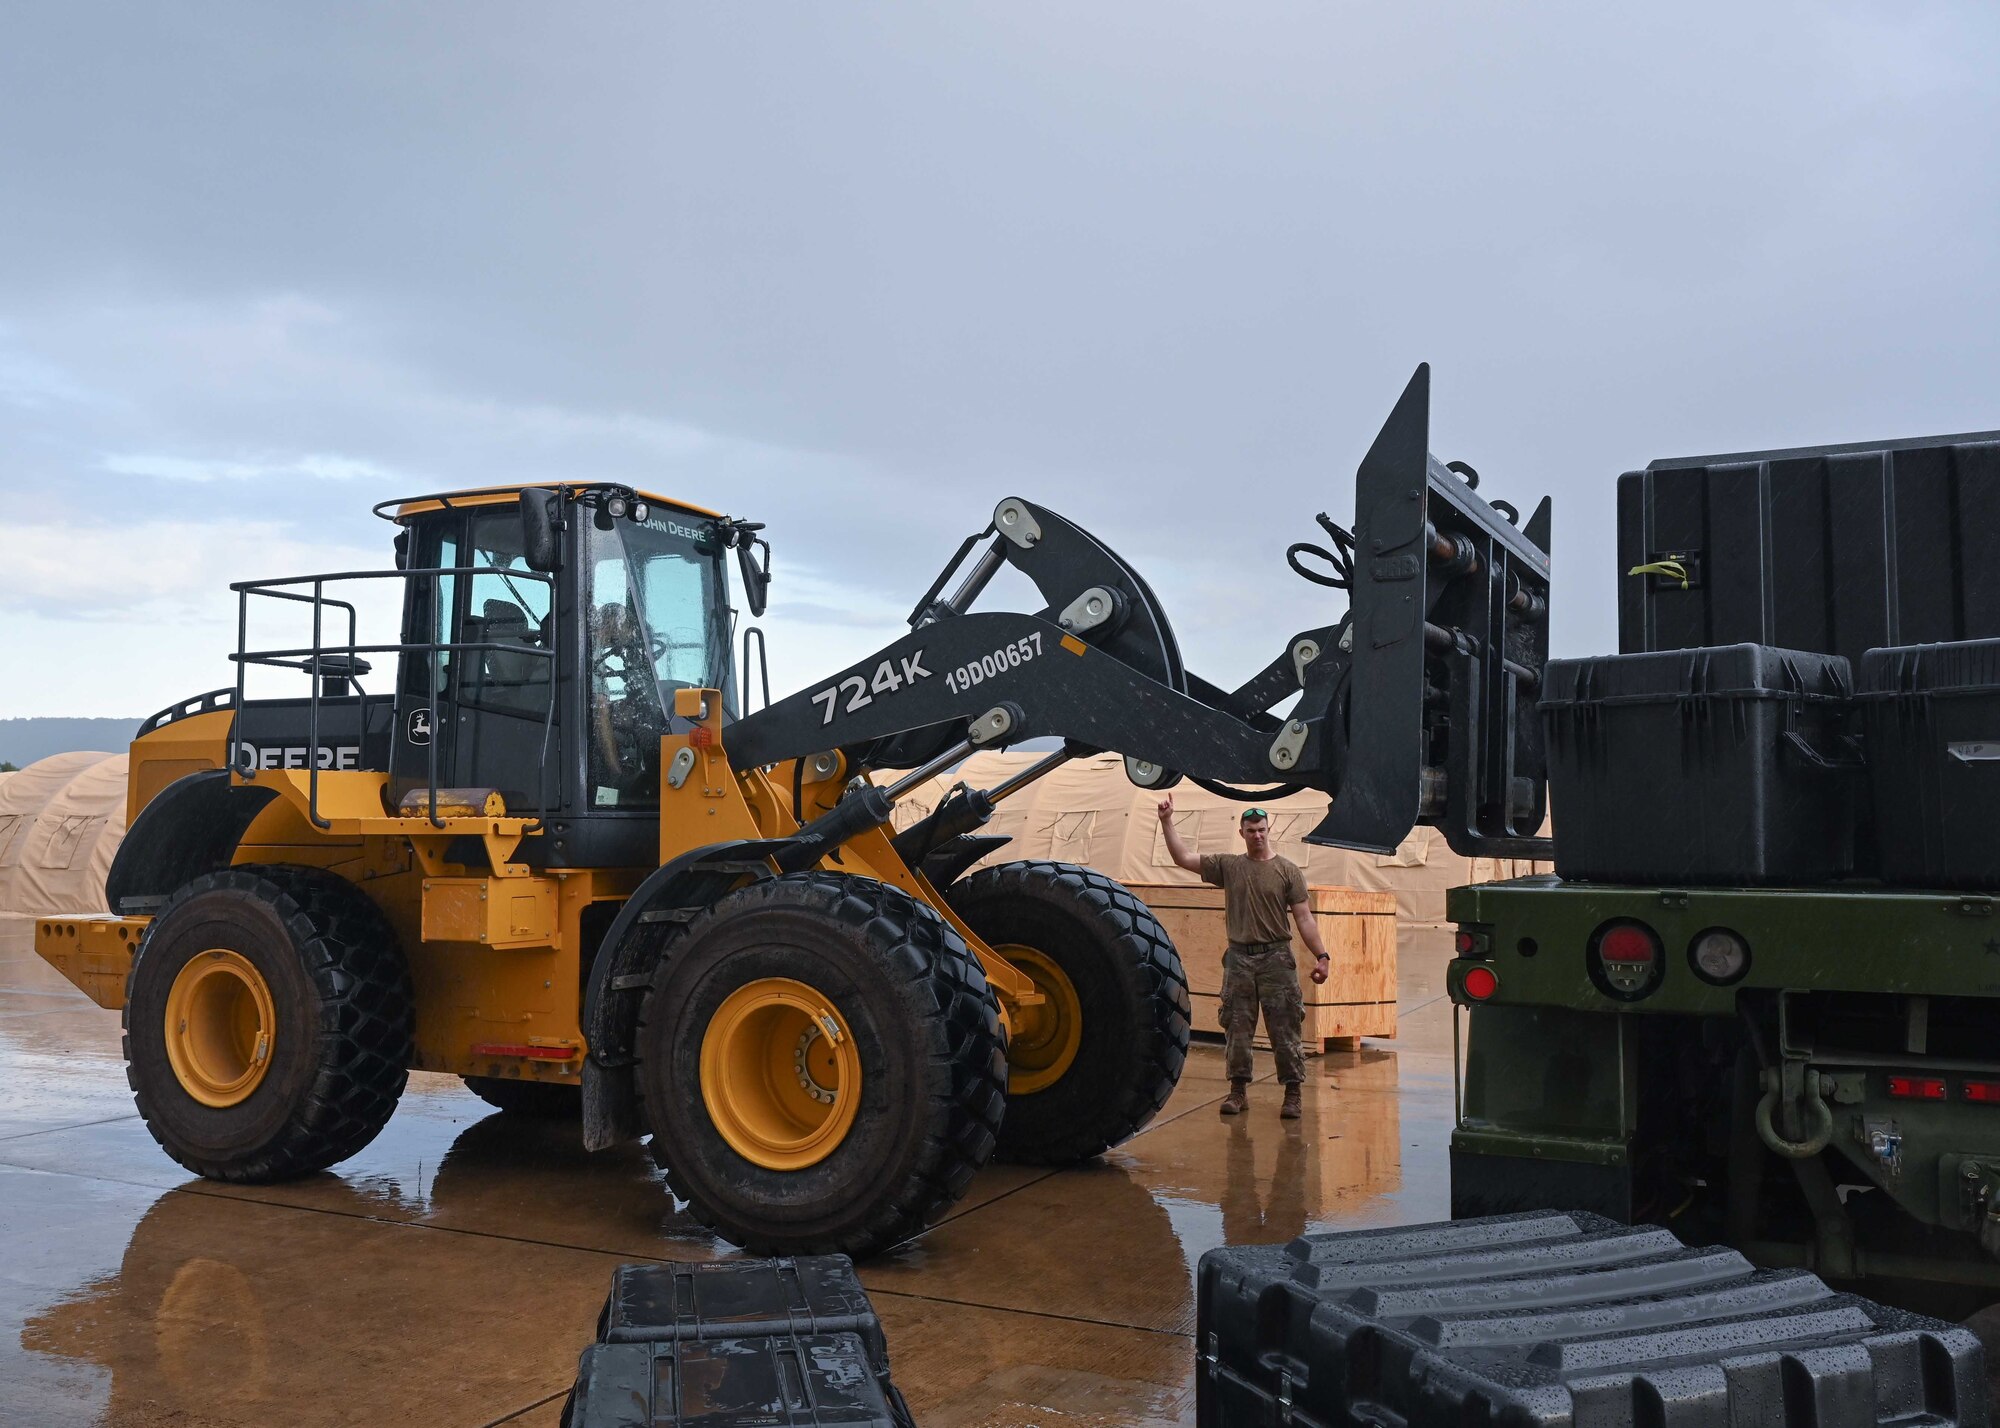 Airman moves heavy equipment with large working vehicle.